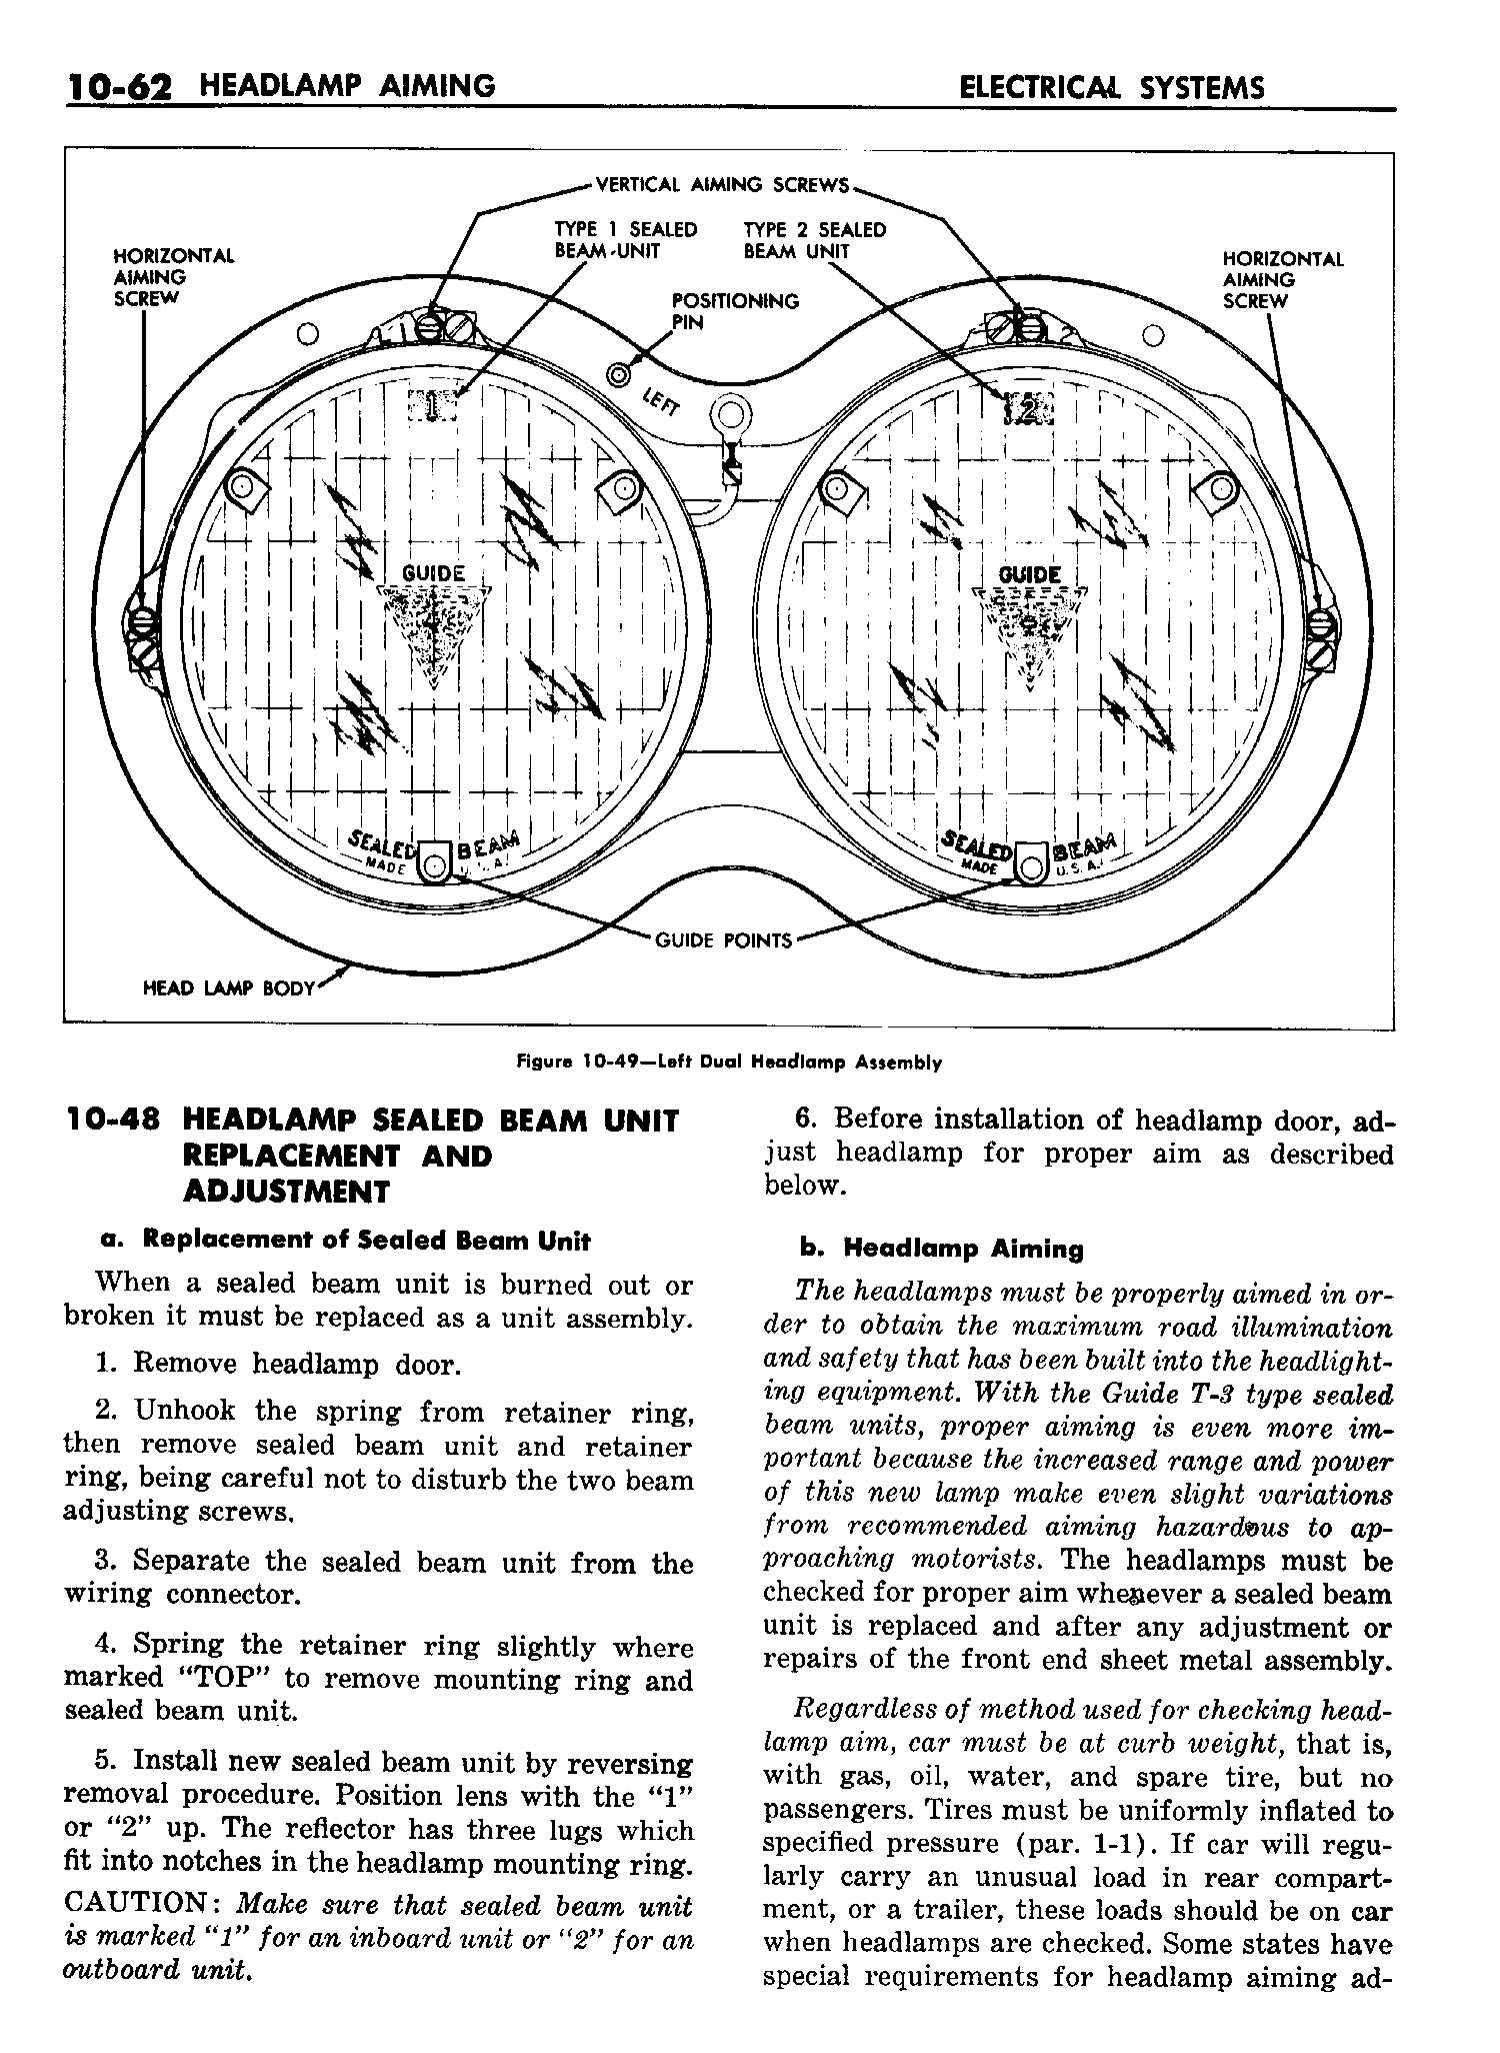 n_11 1958 Buick Shop Manual - Electrical Systems_62.jpg